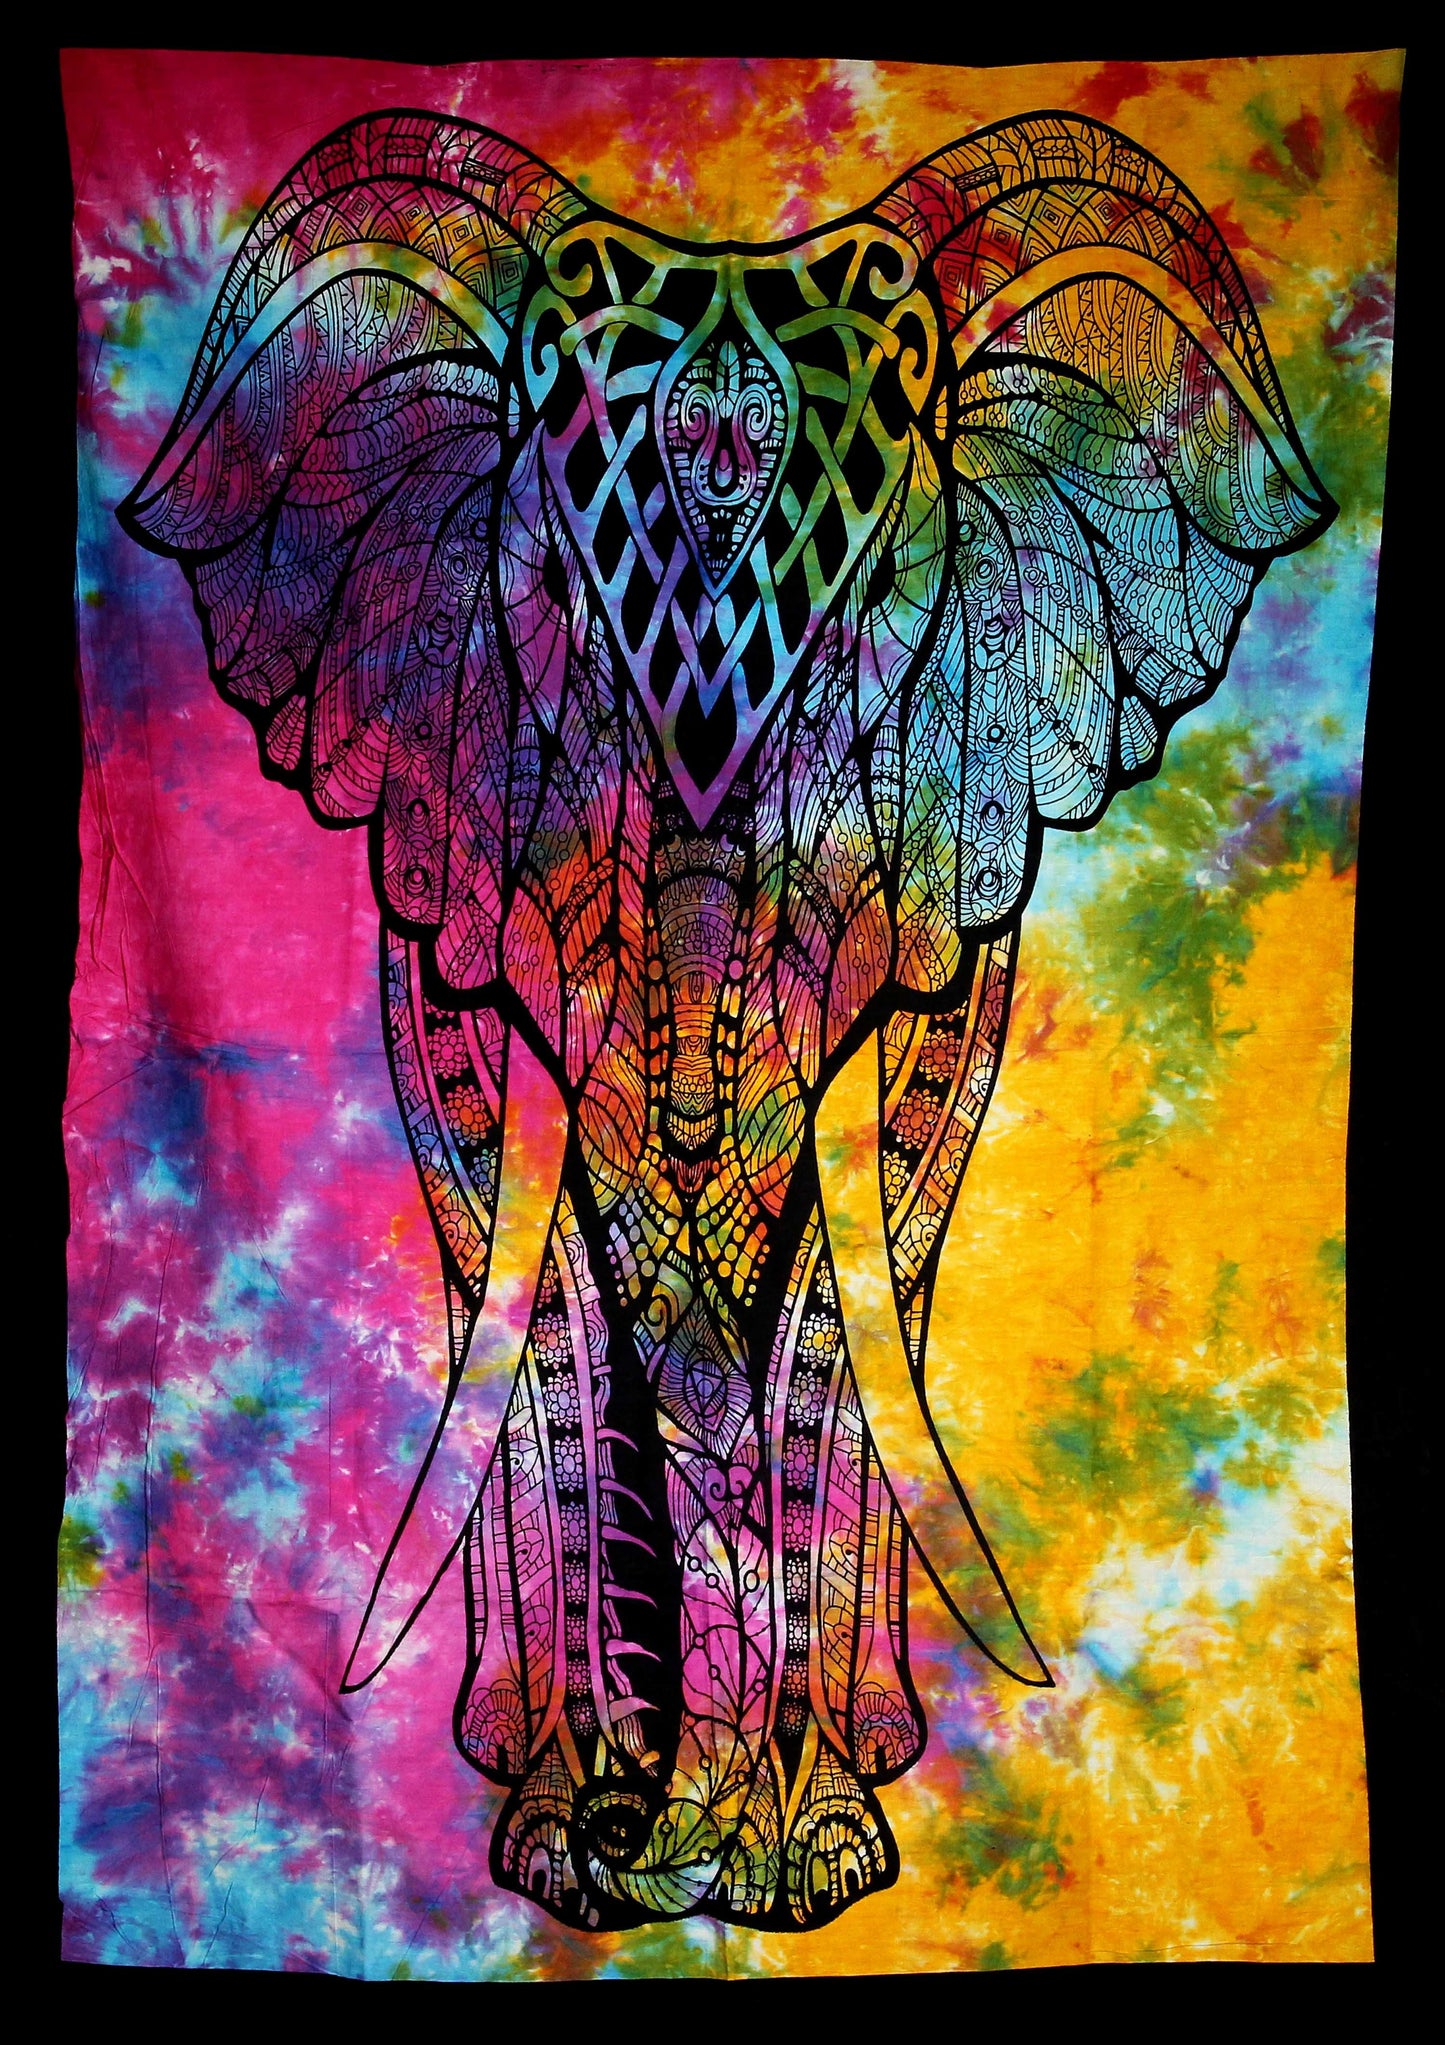 Hand printed Fabric Posters Mini Elephant Tapestries Wall Hangings - Available in 5 Colors